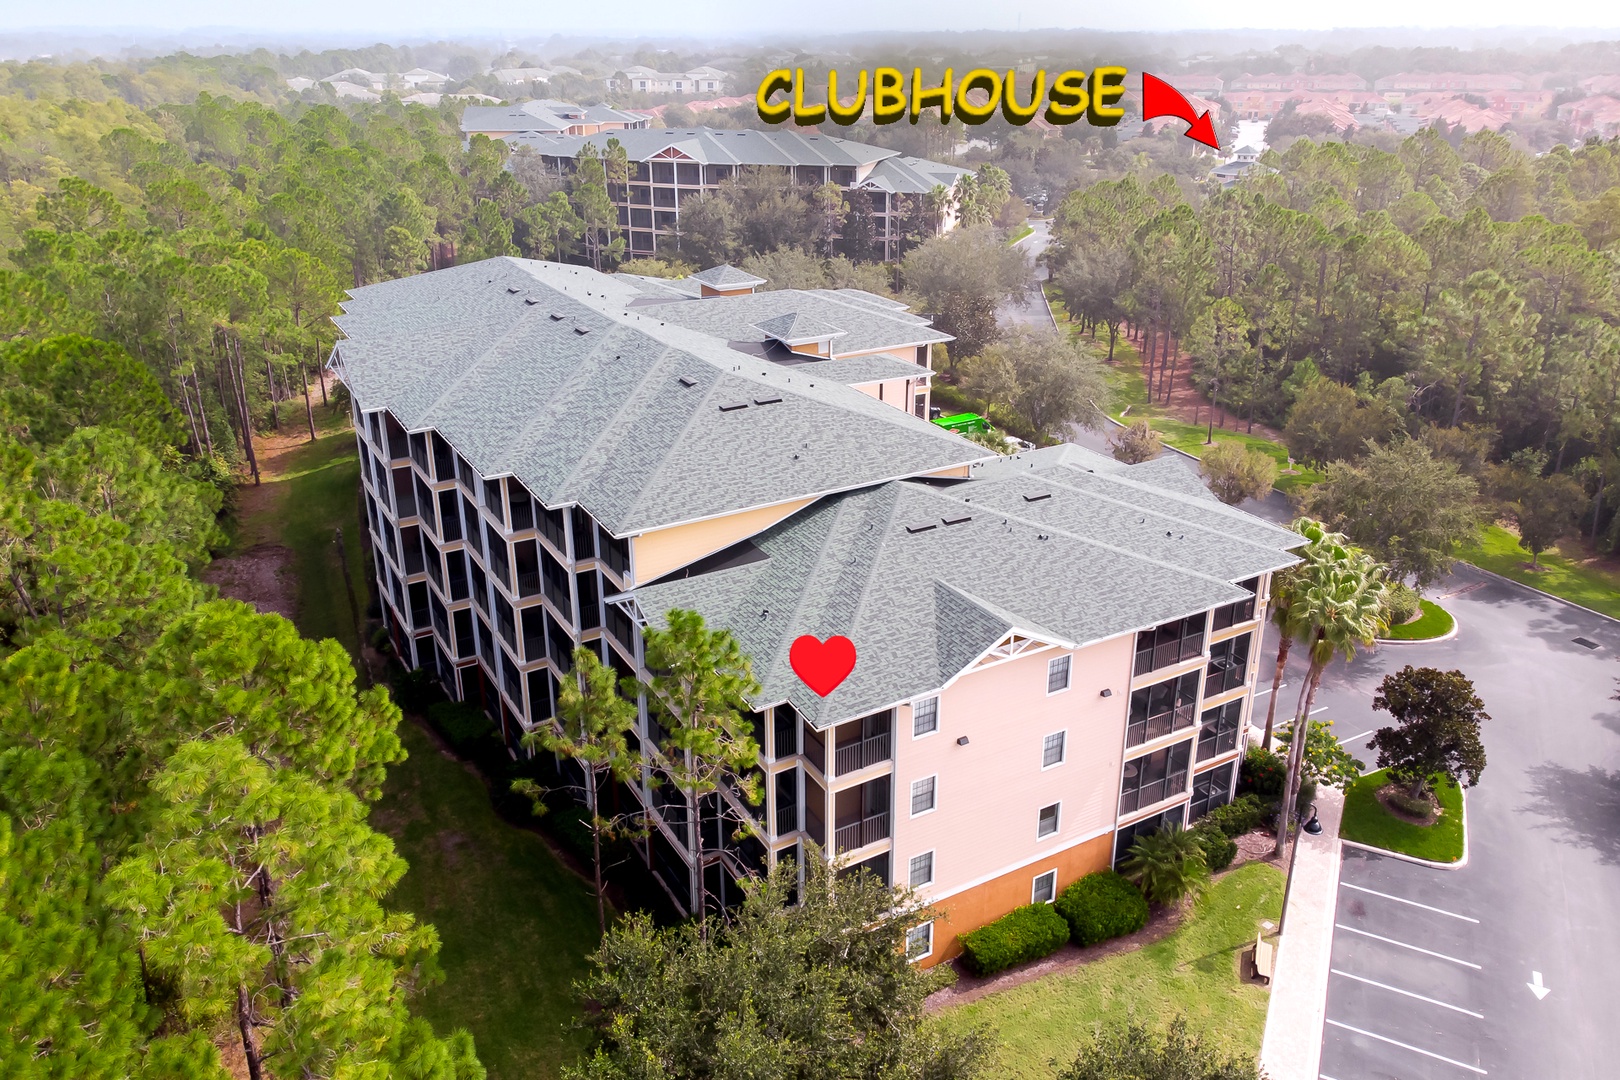 The clubhouse is just a short walk away from this exceptional condo